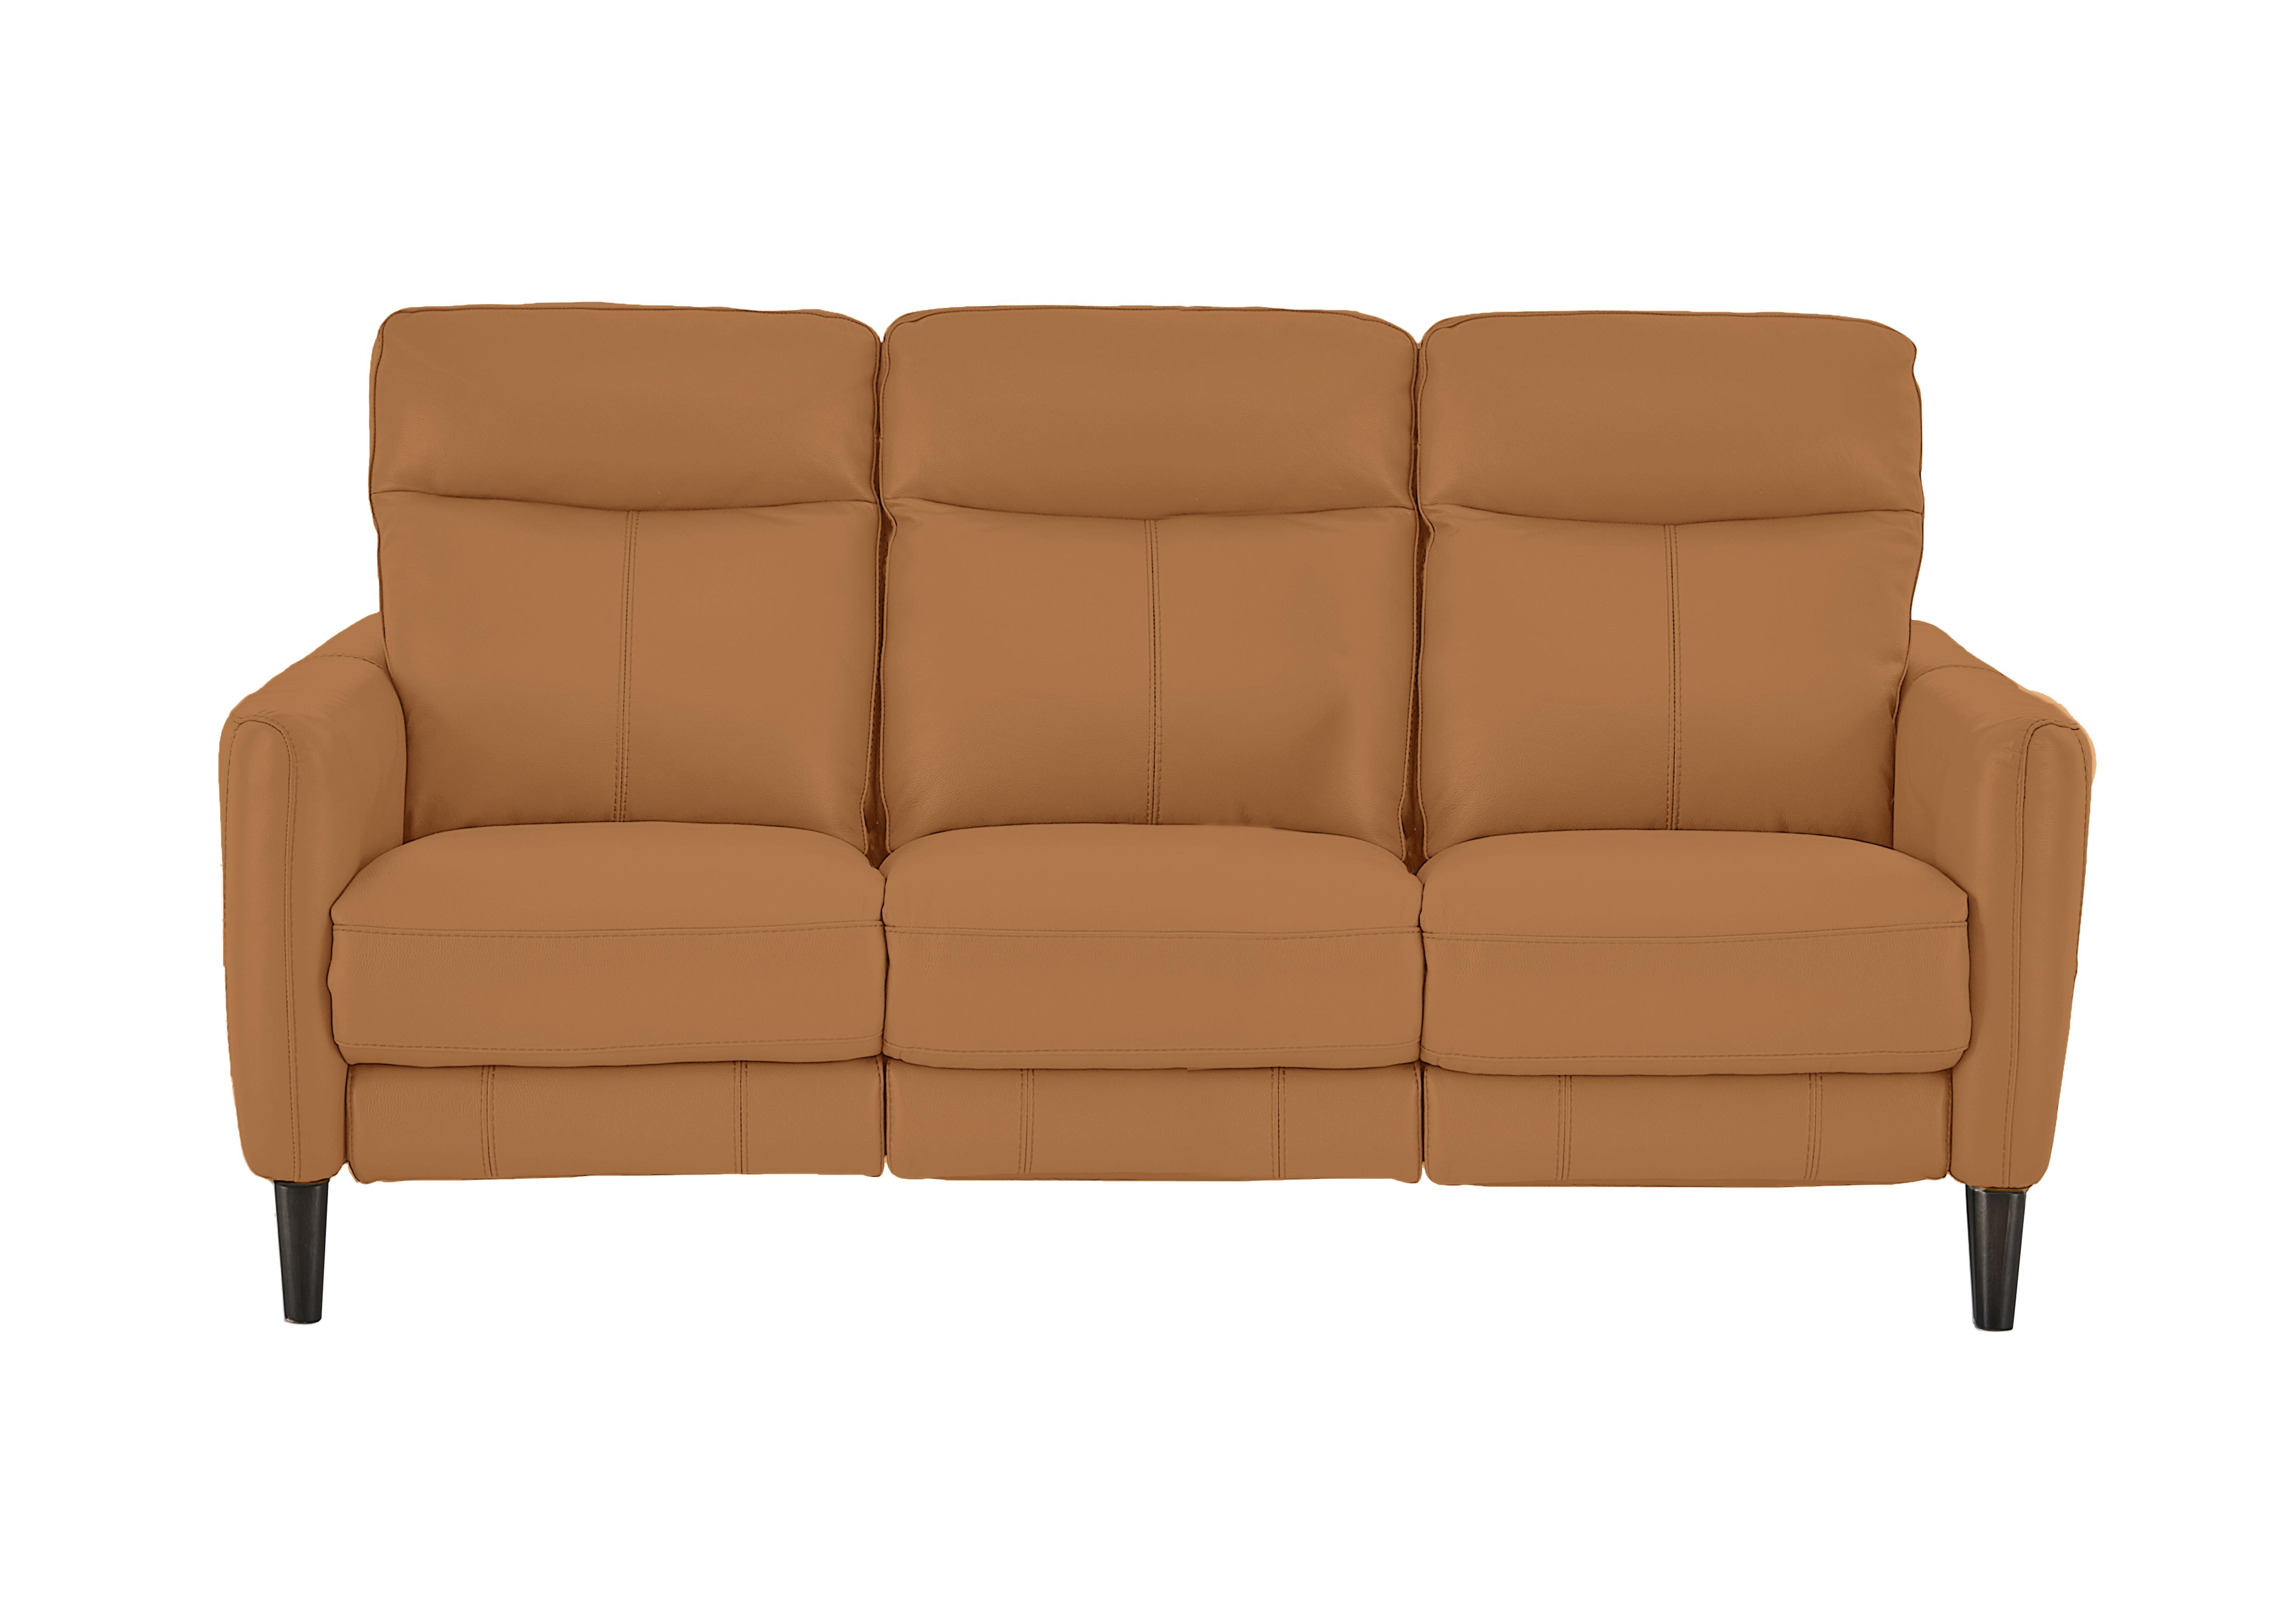 Compact Collection Petit 3 Seater Leather Sofa in Bv-335e Honey Yellow on Furniture Village